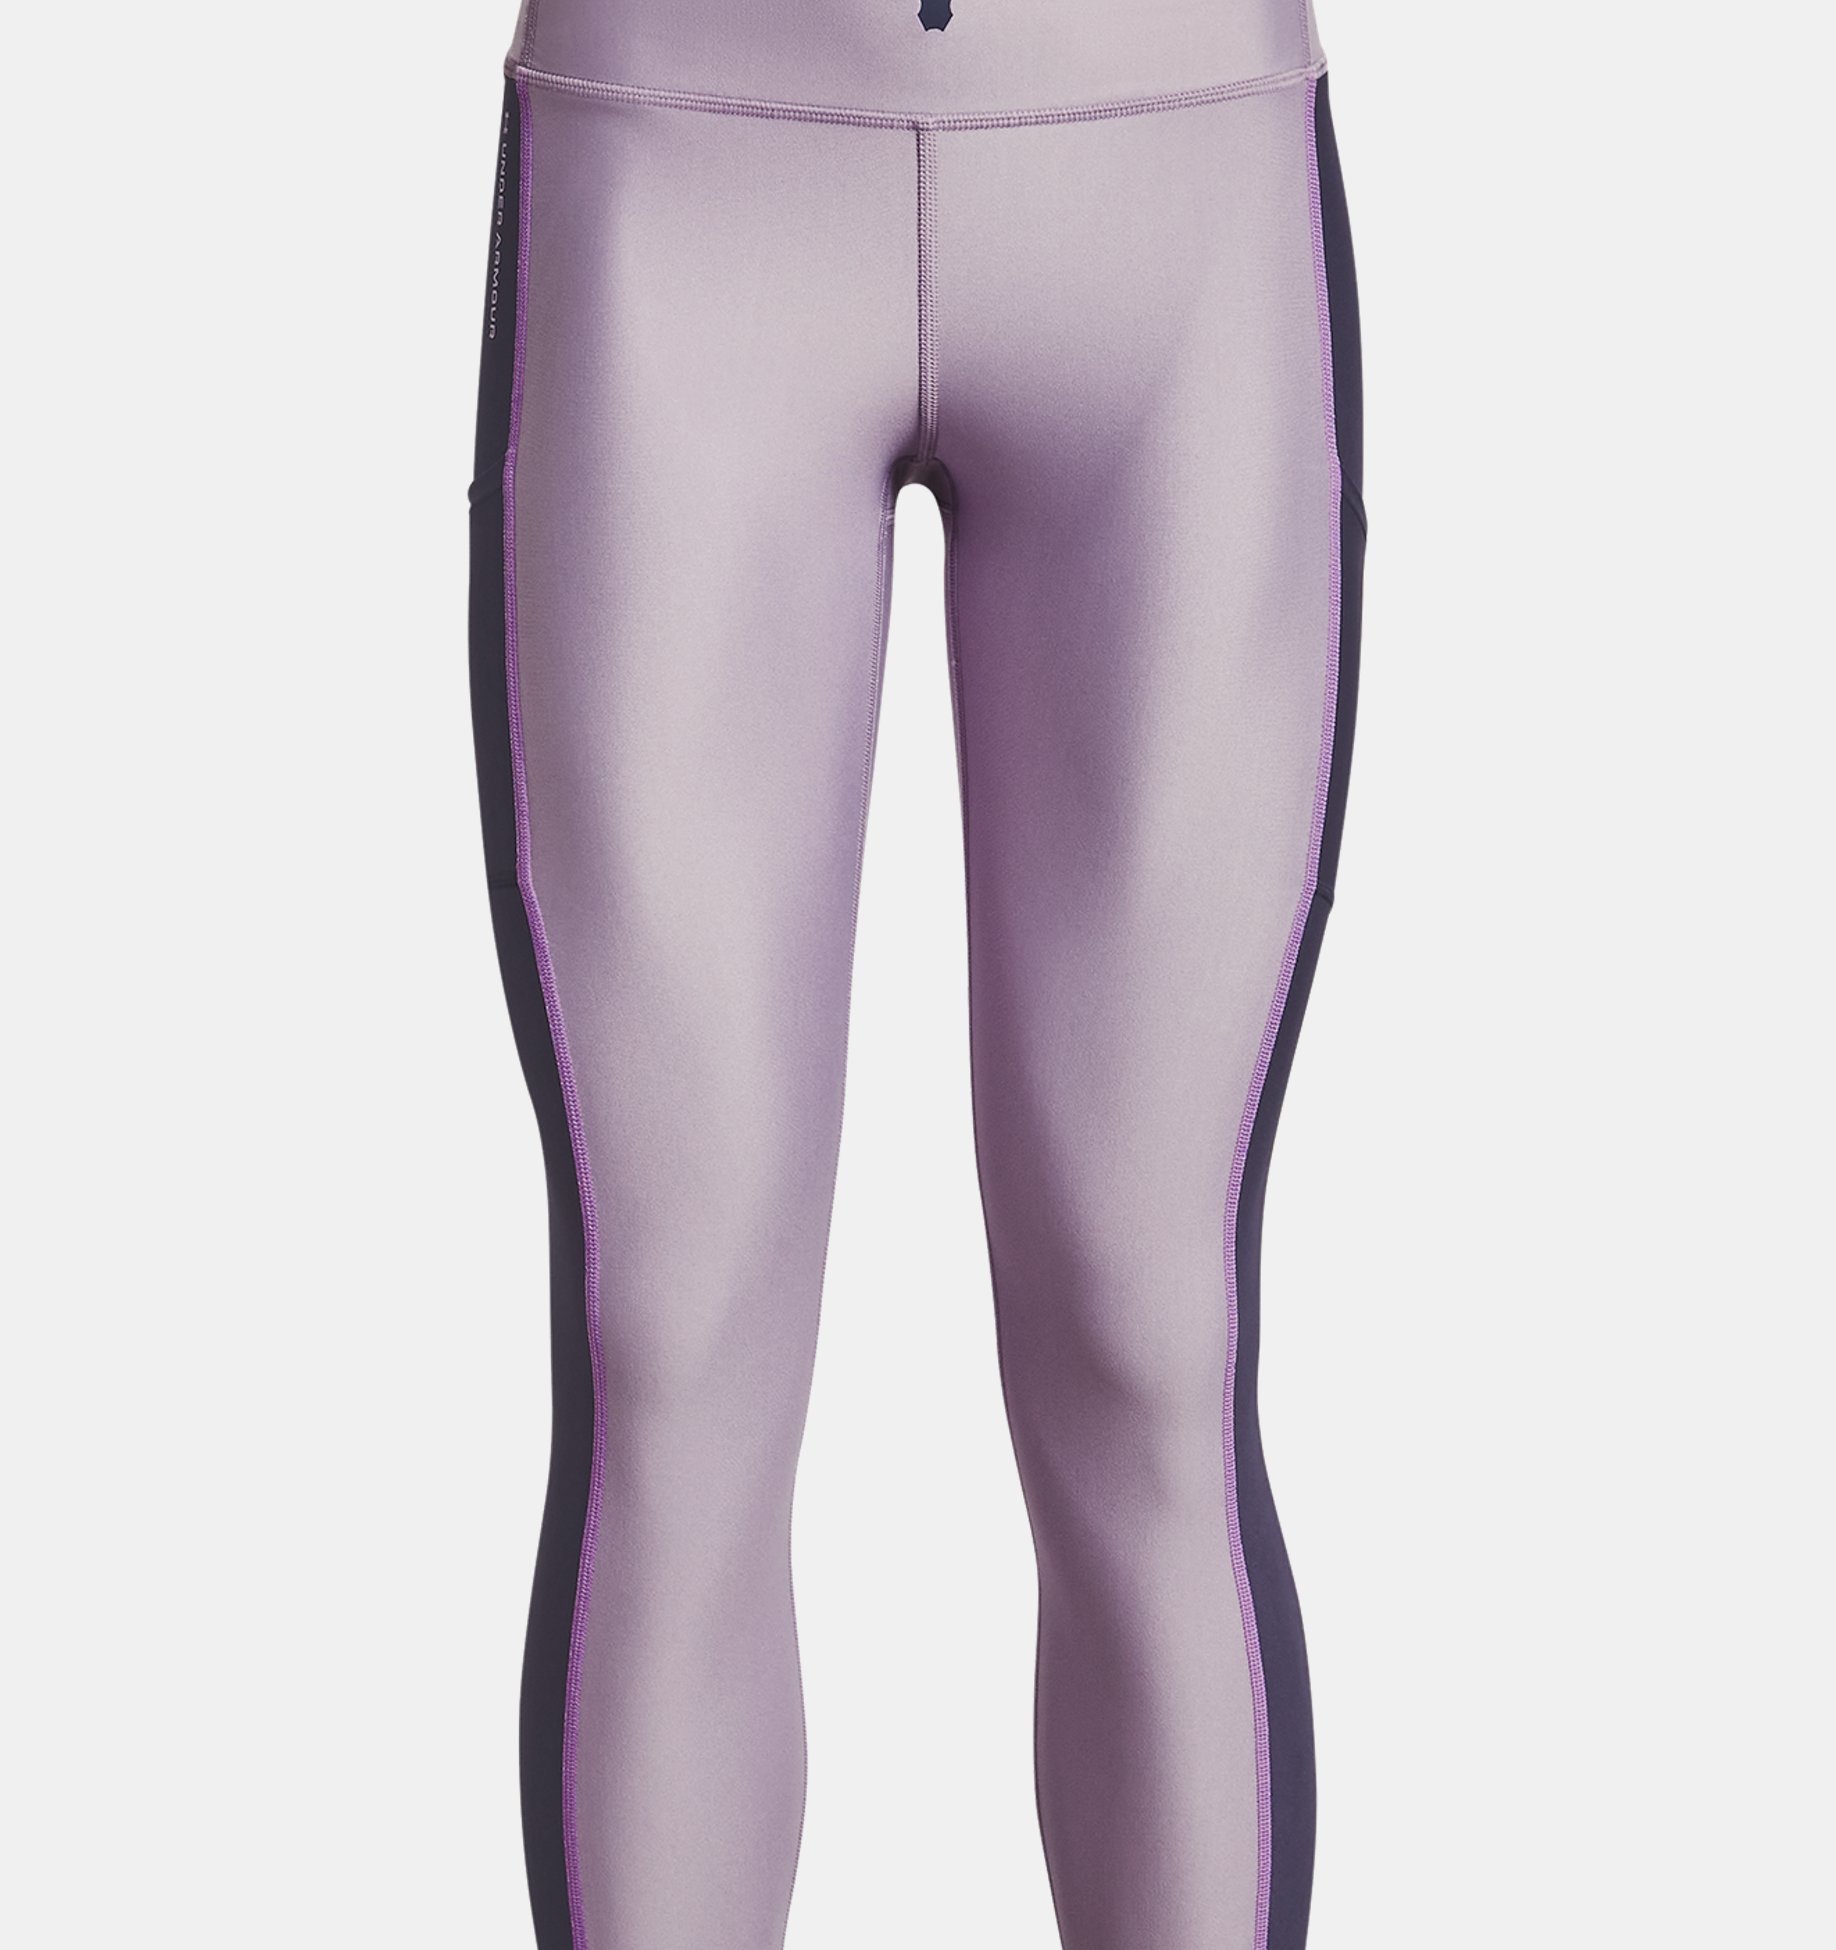 UNDER ARMOUR WOMEN'S COMPRESSION HIGH-RISE ANKLE LEGGINGS PURPLE#1377099-NWT